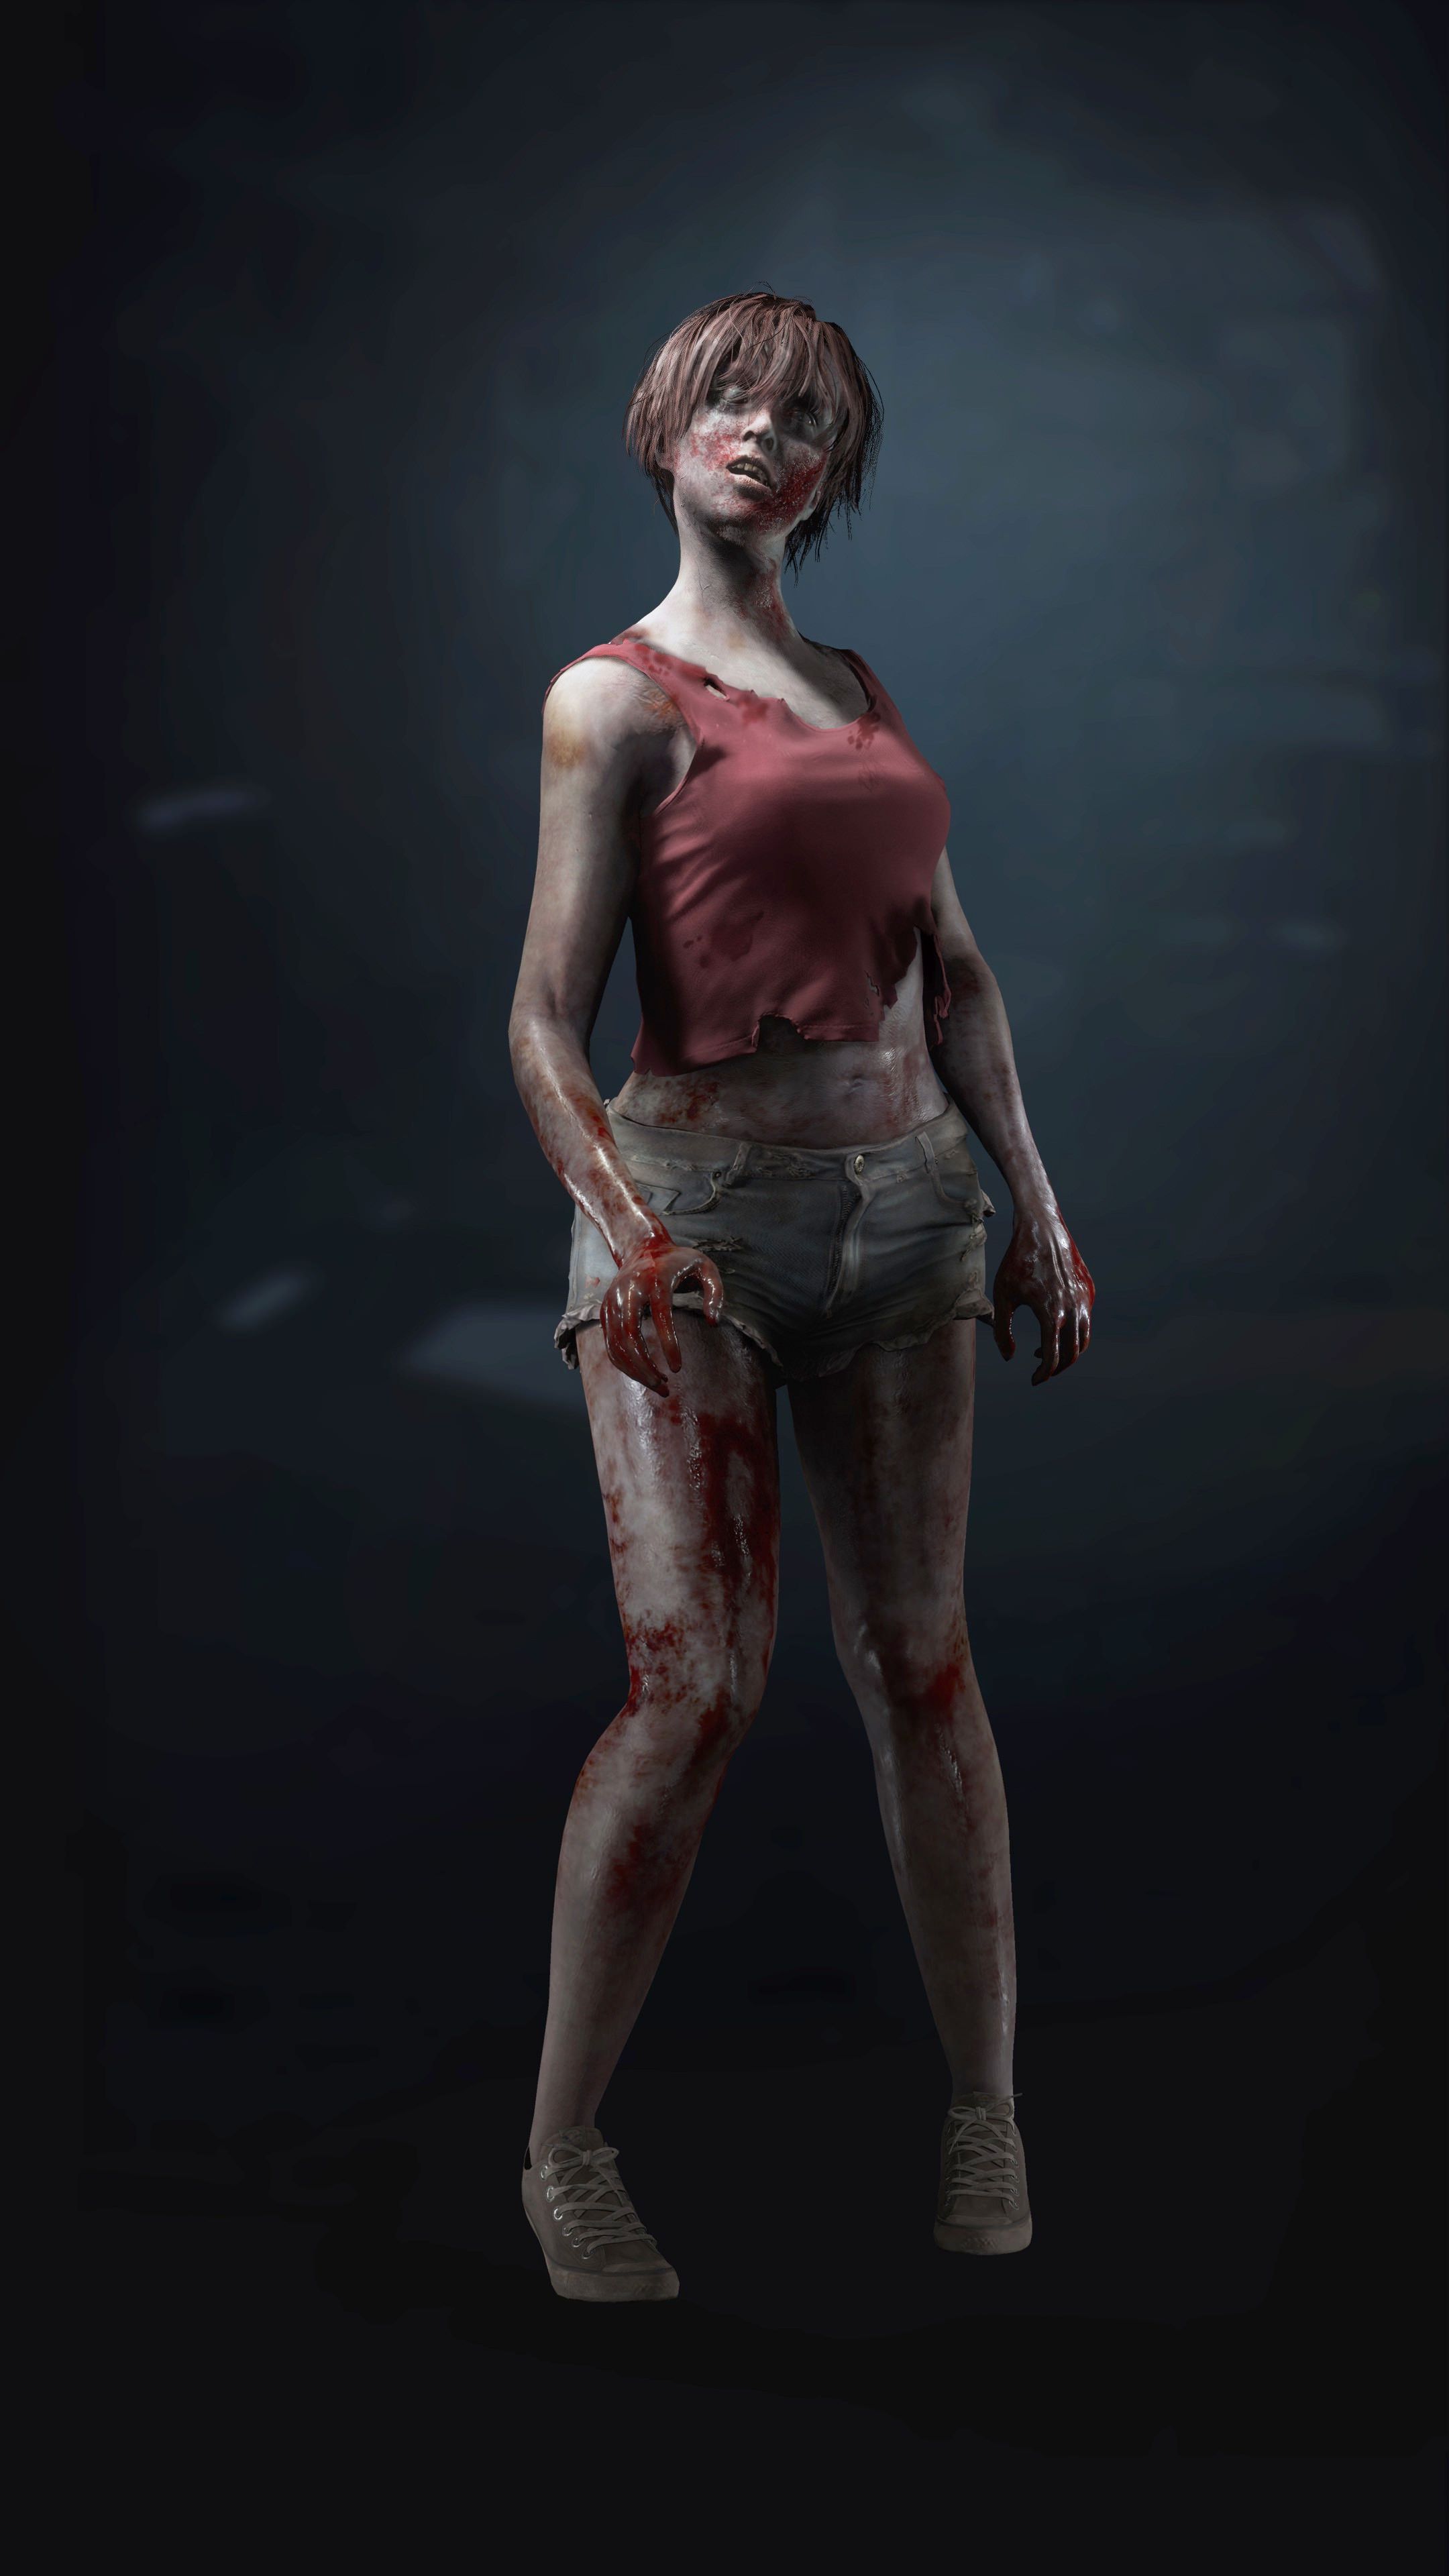 [Attention] The female zombie of Bio 2 remake wwwwww too erotic in Gachi 3